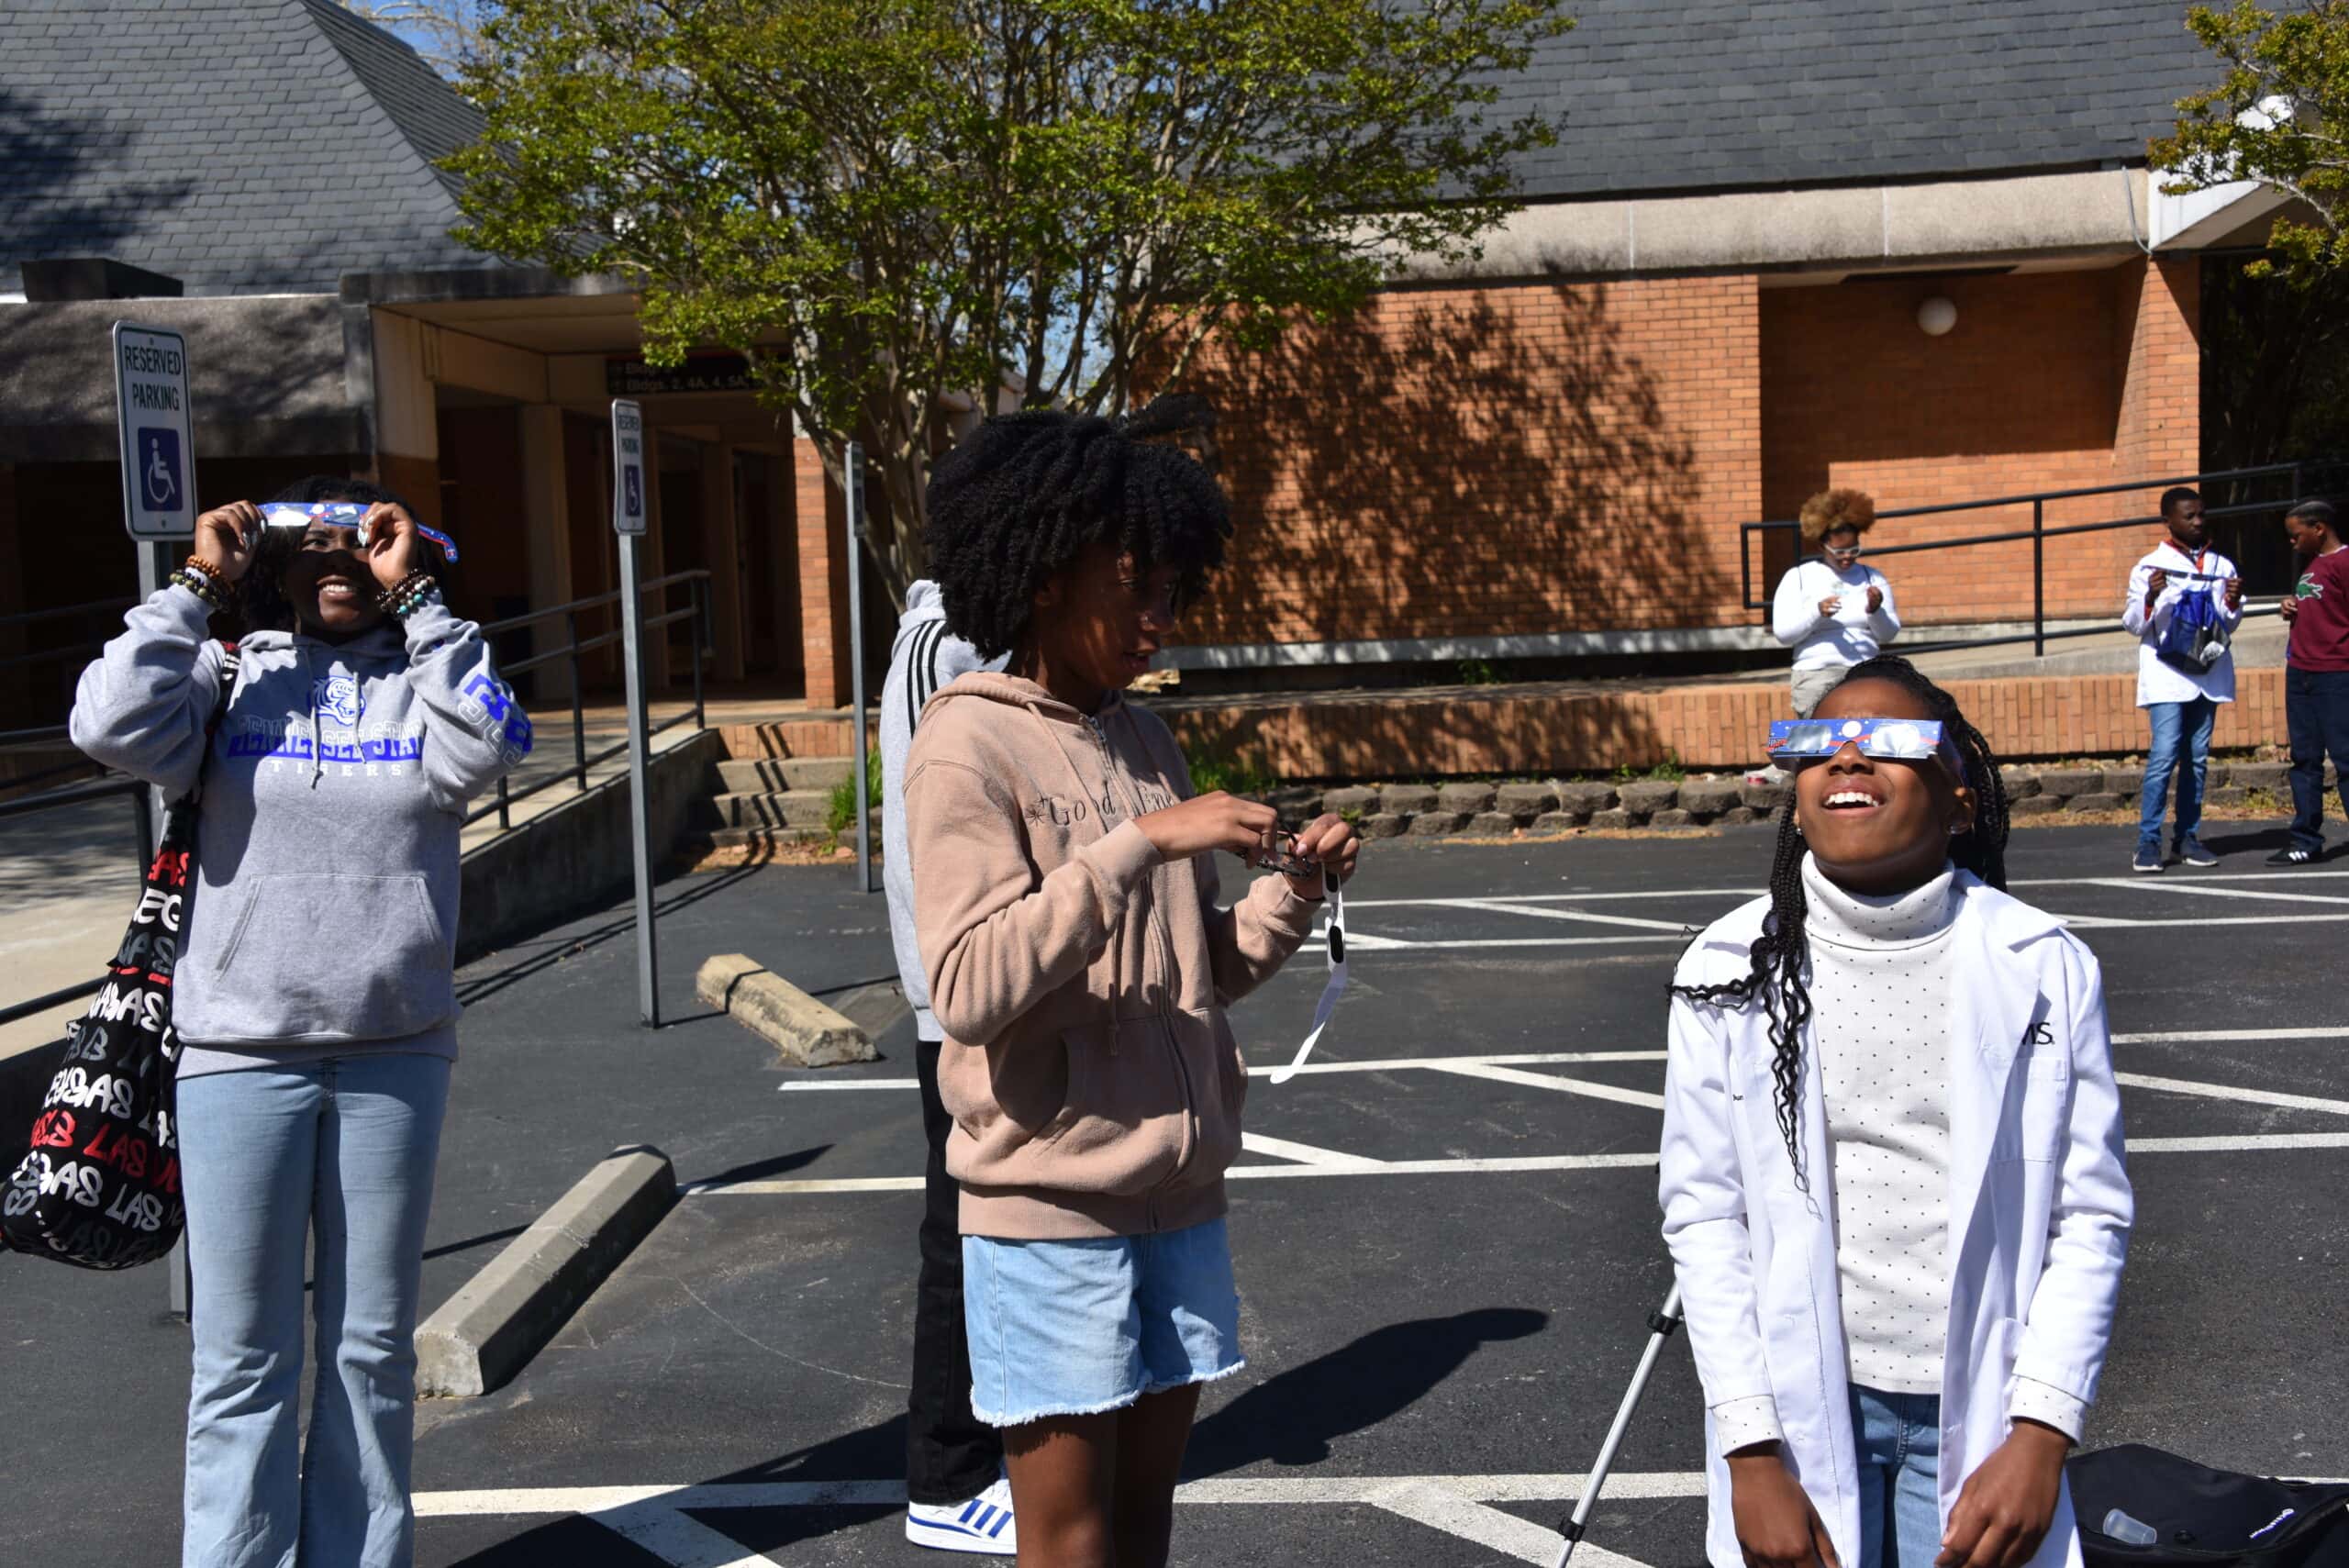 Pathways Academy scholars try out their eclipse glasses as they learn about how to safely view the sun.